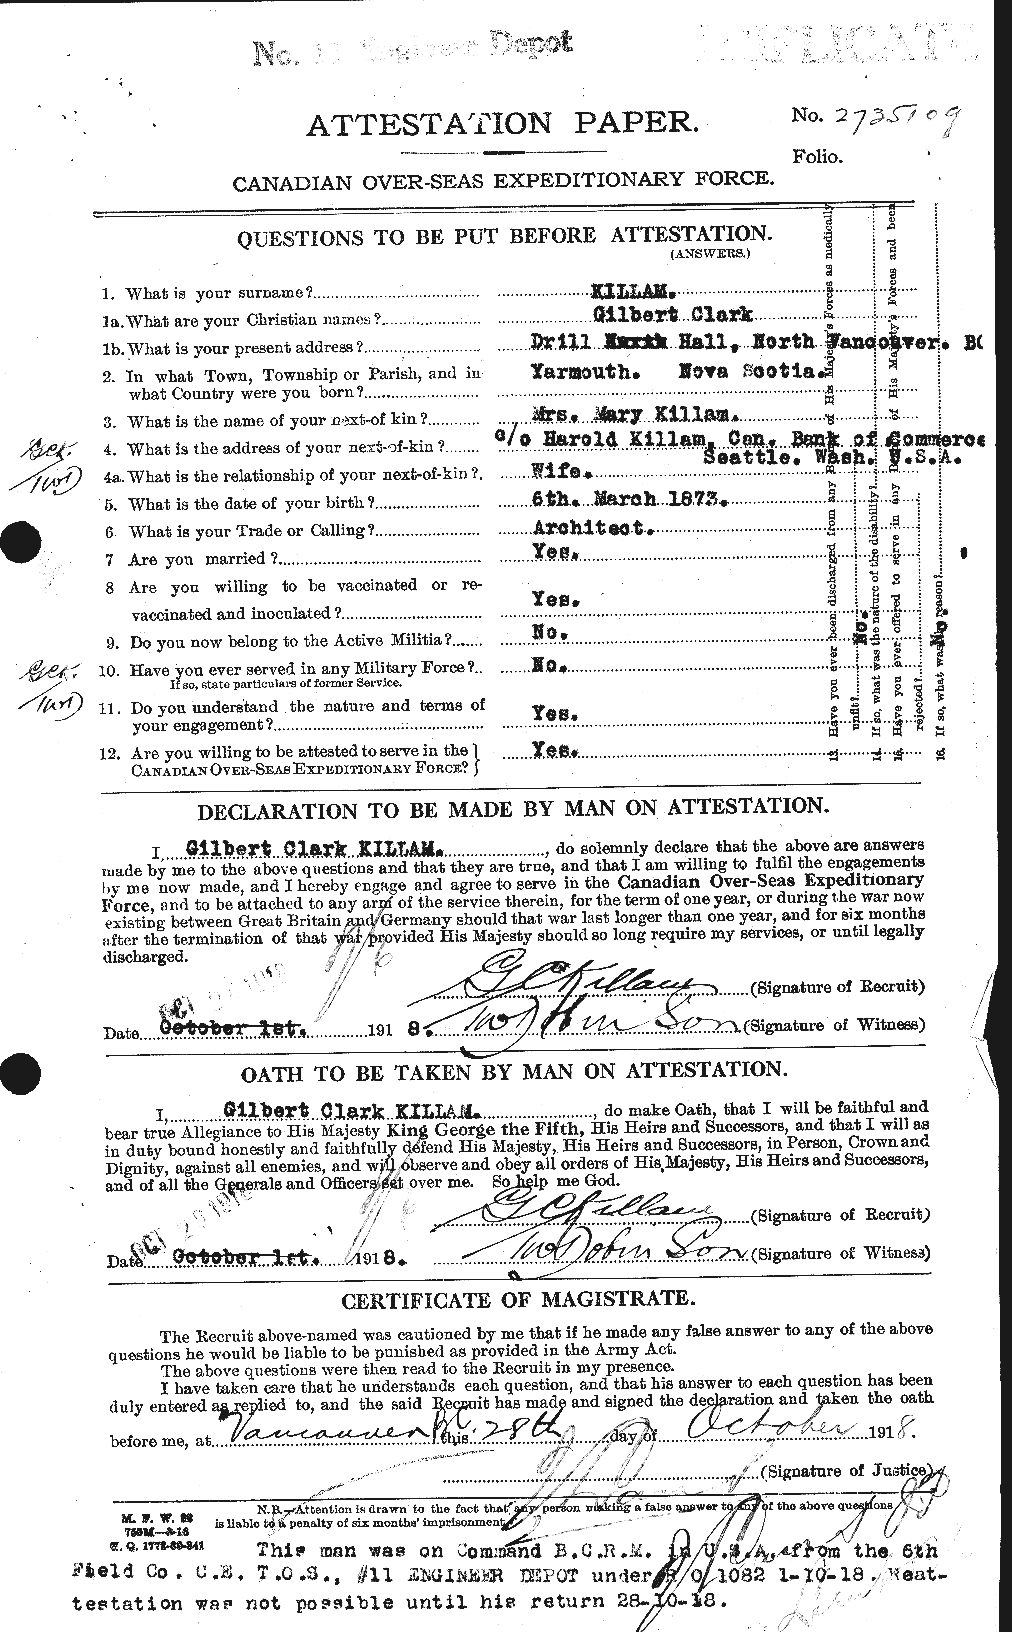 Personnel Records of the First World War - CEF 433984a